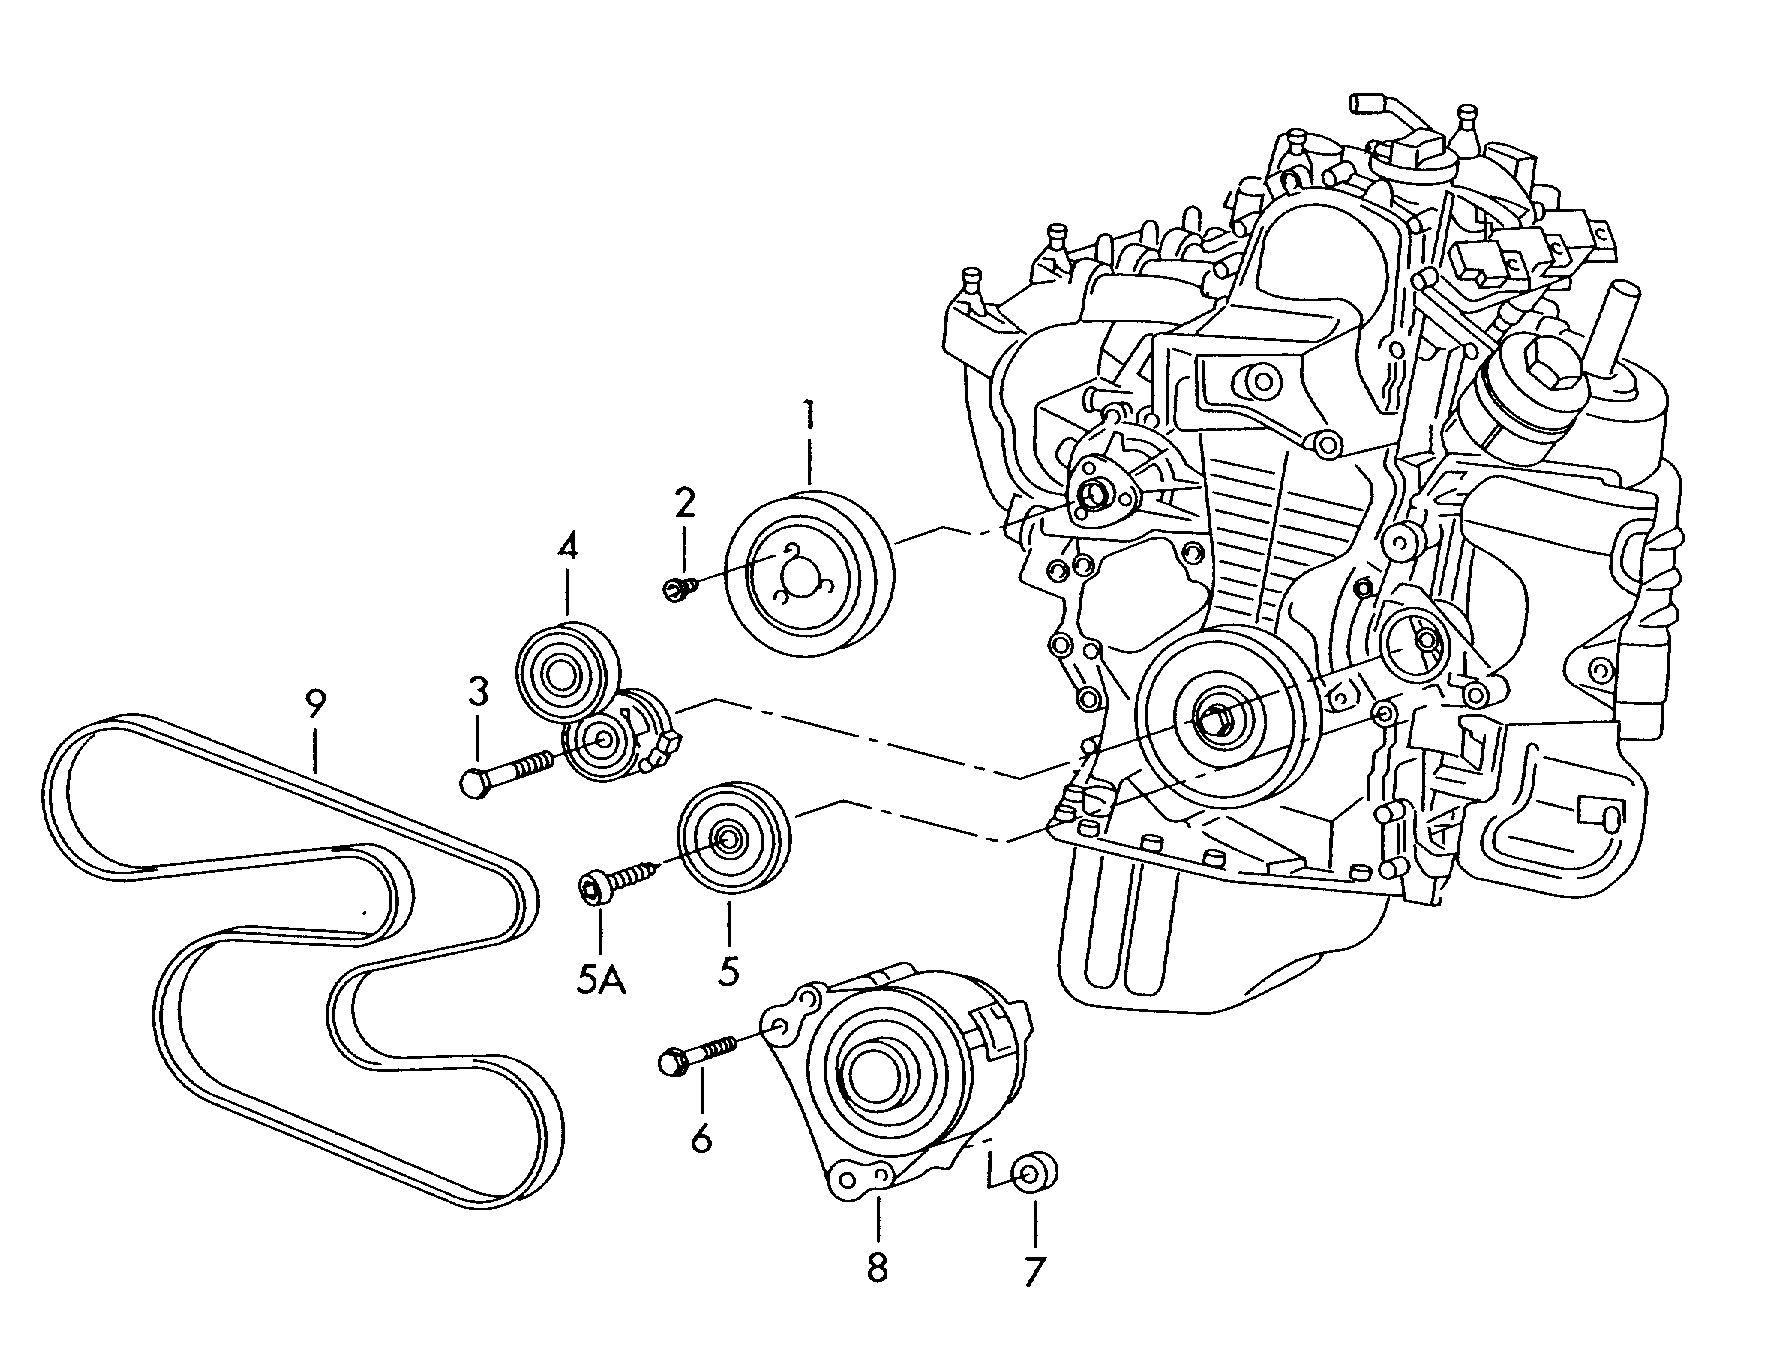 connecting and mounting parts<br>for alternatorPoly-V-belt 1.2 Ltr. - Fabia - fab